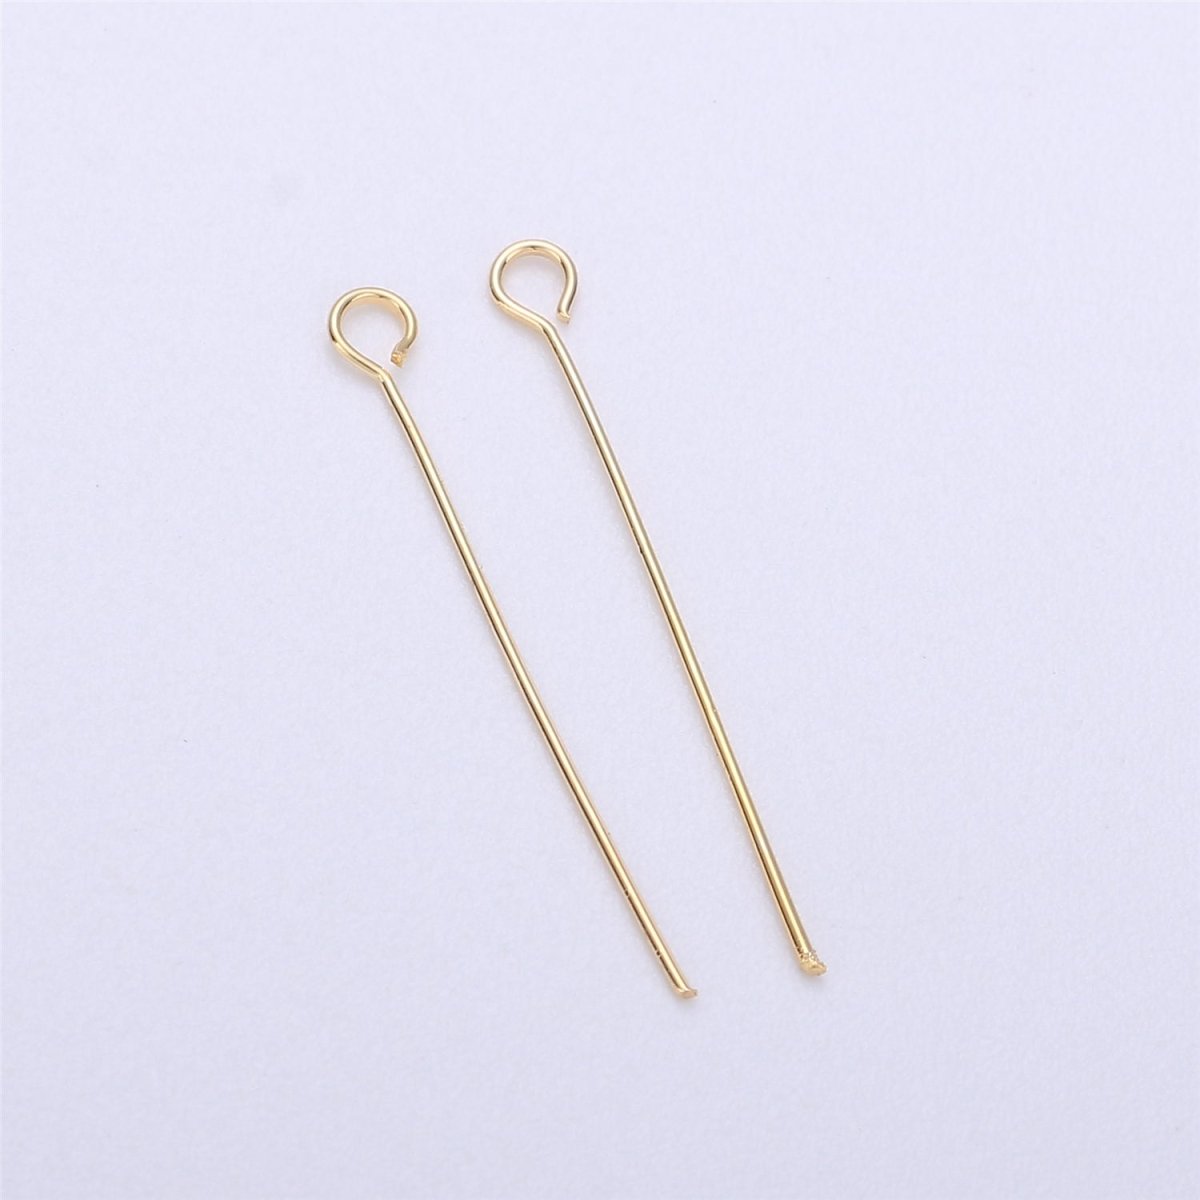 Gold Eye Pin Silver Rose Gold Black Open Eyepins Headpins 0.6mm (24 Gauge) by 15mm, 18mm Jewelry Making Craft Supply DIY Finding K-102 L-546 L-547 - DLUXCA